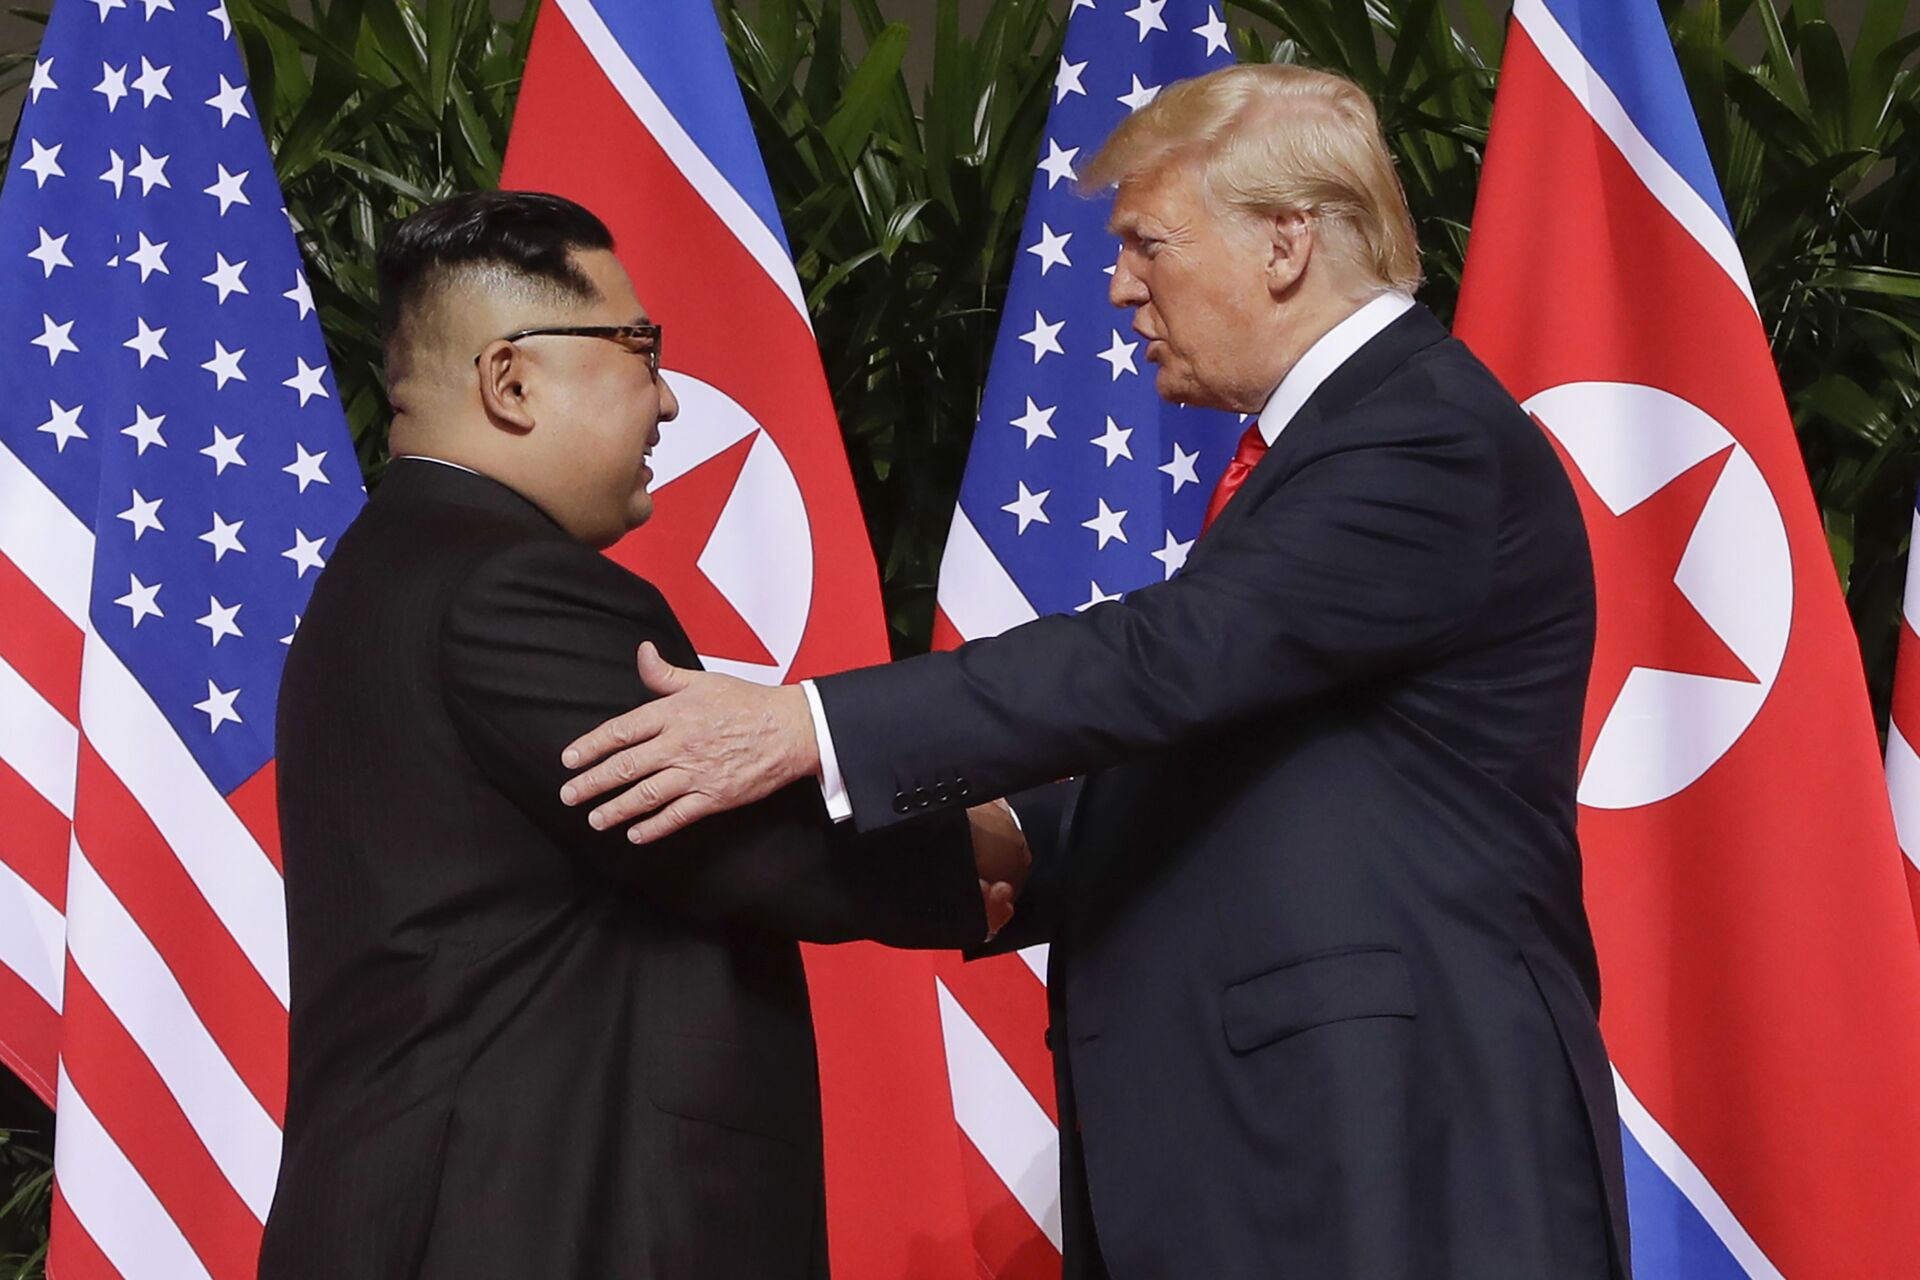 n this June 12, 2018 file photo, U.S. President Donald Trump, right, shakes hands with North Korea leader Kim Jong Un at the Capella resort on Sentosa Island in Singapore. Kim’s fifth meeting with Chinese President Xi Jinping continues his ambitious diplomatic outreach that has included summits with the leaders of the United States, South Korea and Russia in the past year and a half. Experts say Kim is attempting to form a united front with North Korea’s main ally China to strengthen his leverage in the stalled nuclear negotiations with the United States.  - Sputnik International, 1920, 28.10.2022